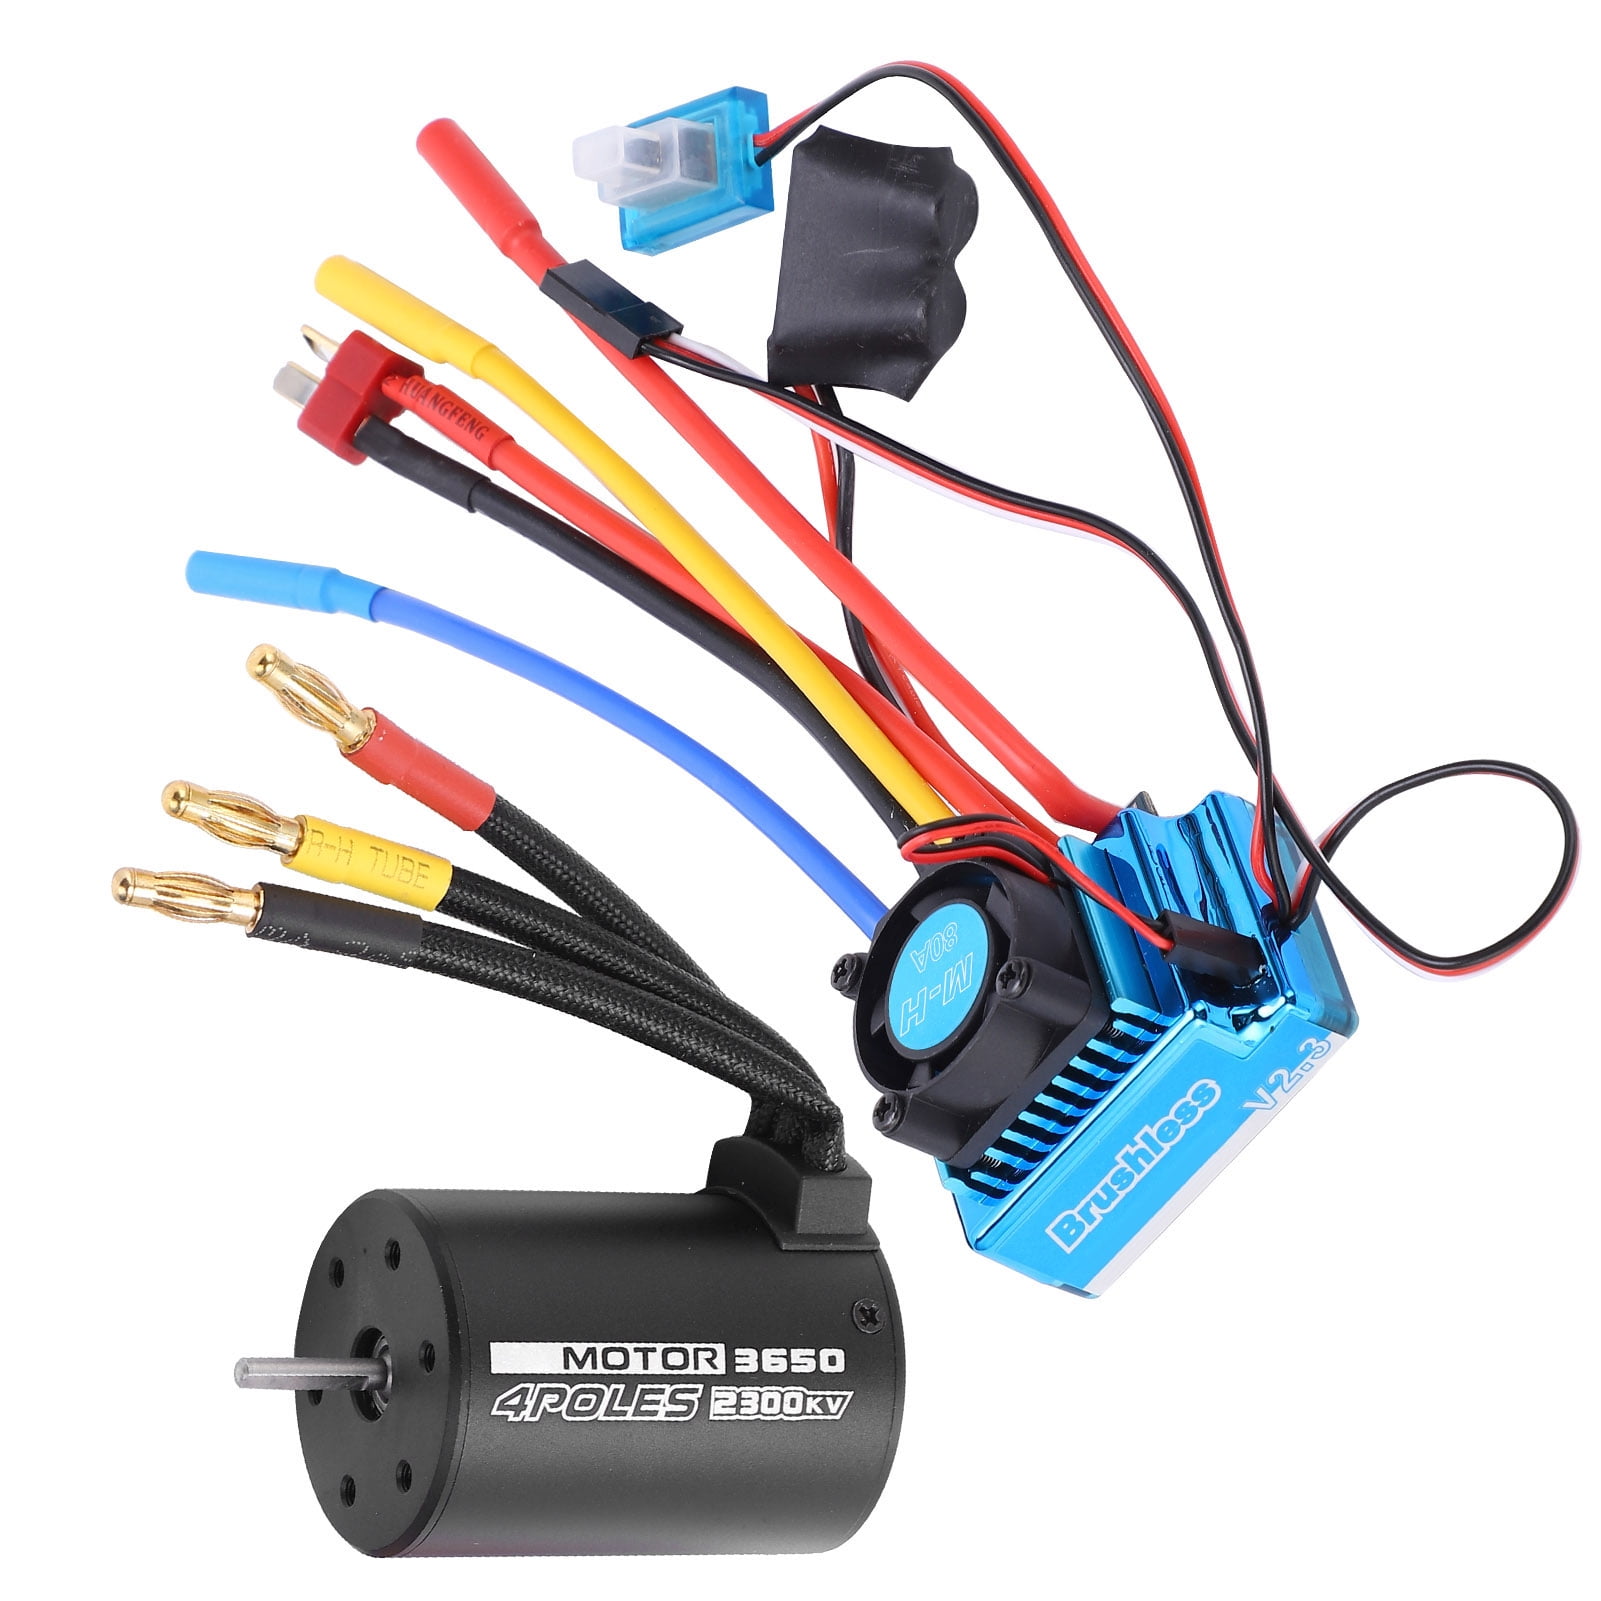 Details about  / Lightweight 3650 2300KV Brushless Motor Replacement Parts Set For 1//10 RC Car